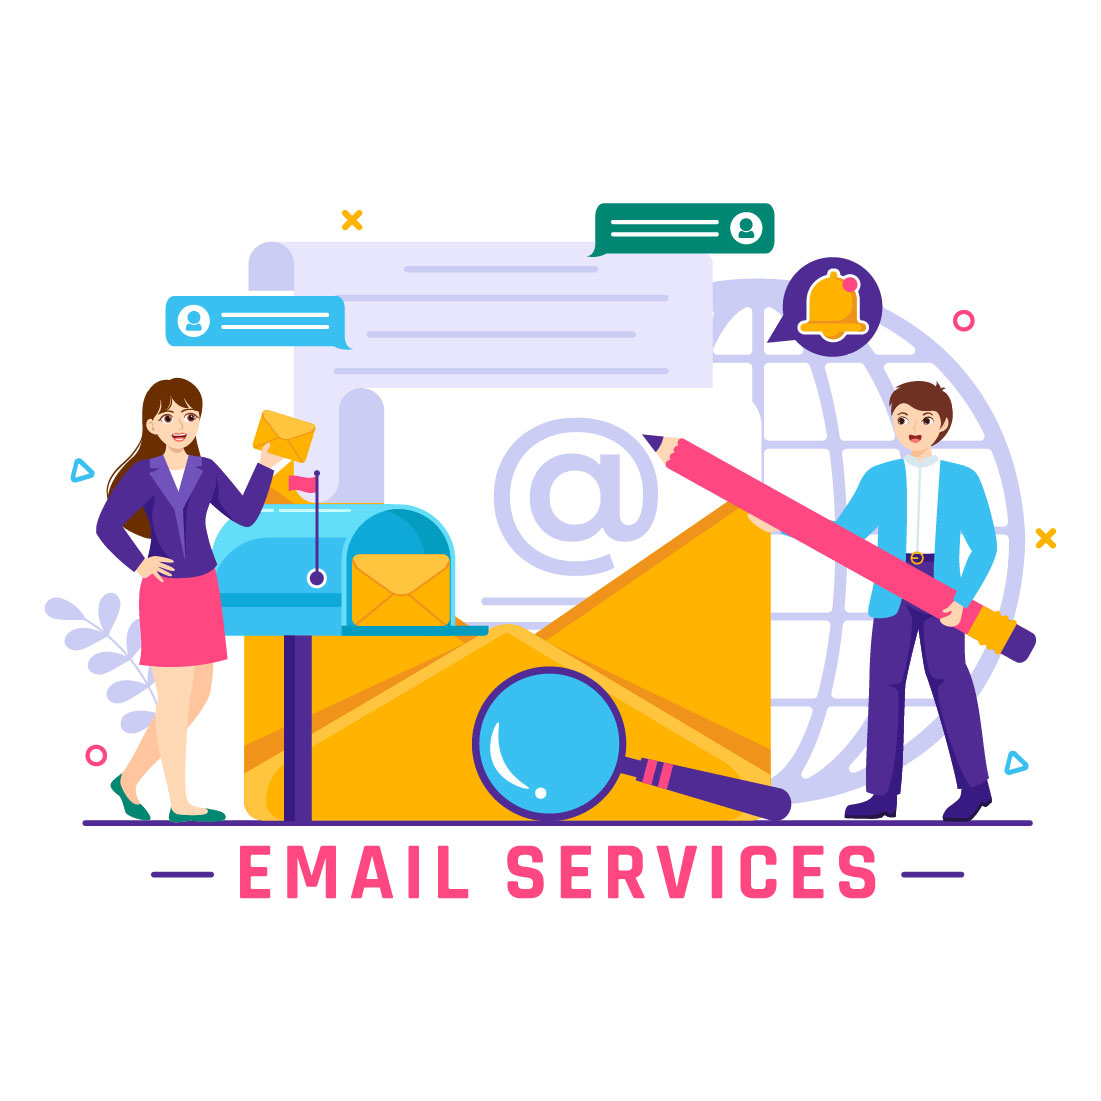 12 Email Service Illustration cover image.